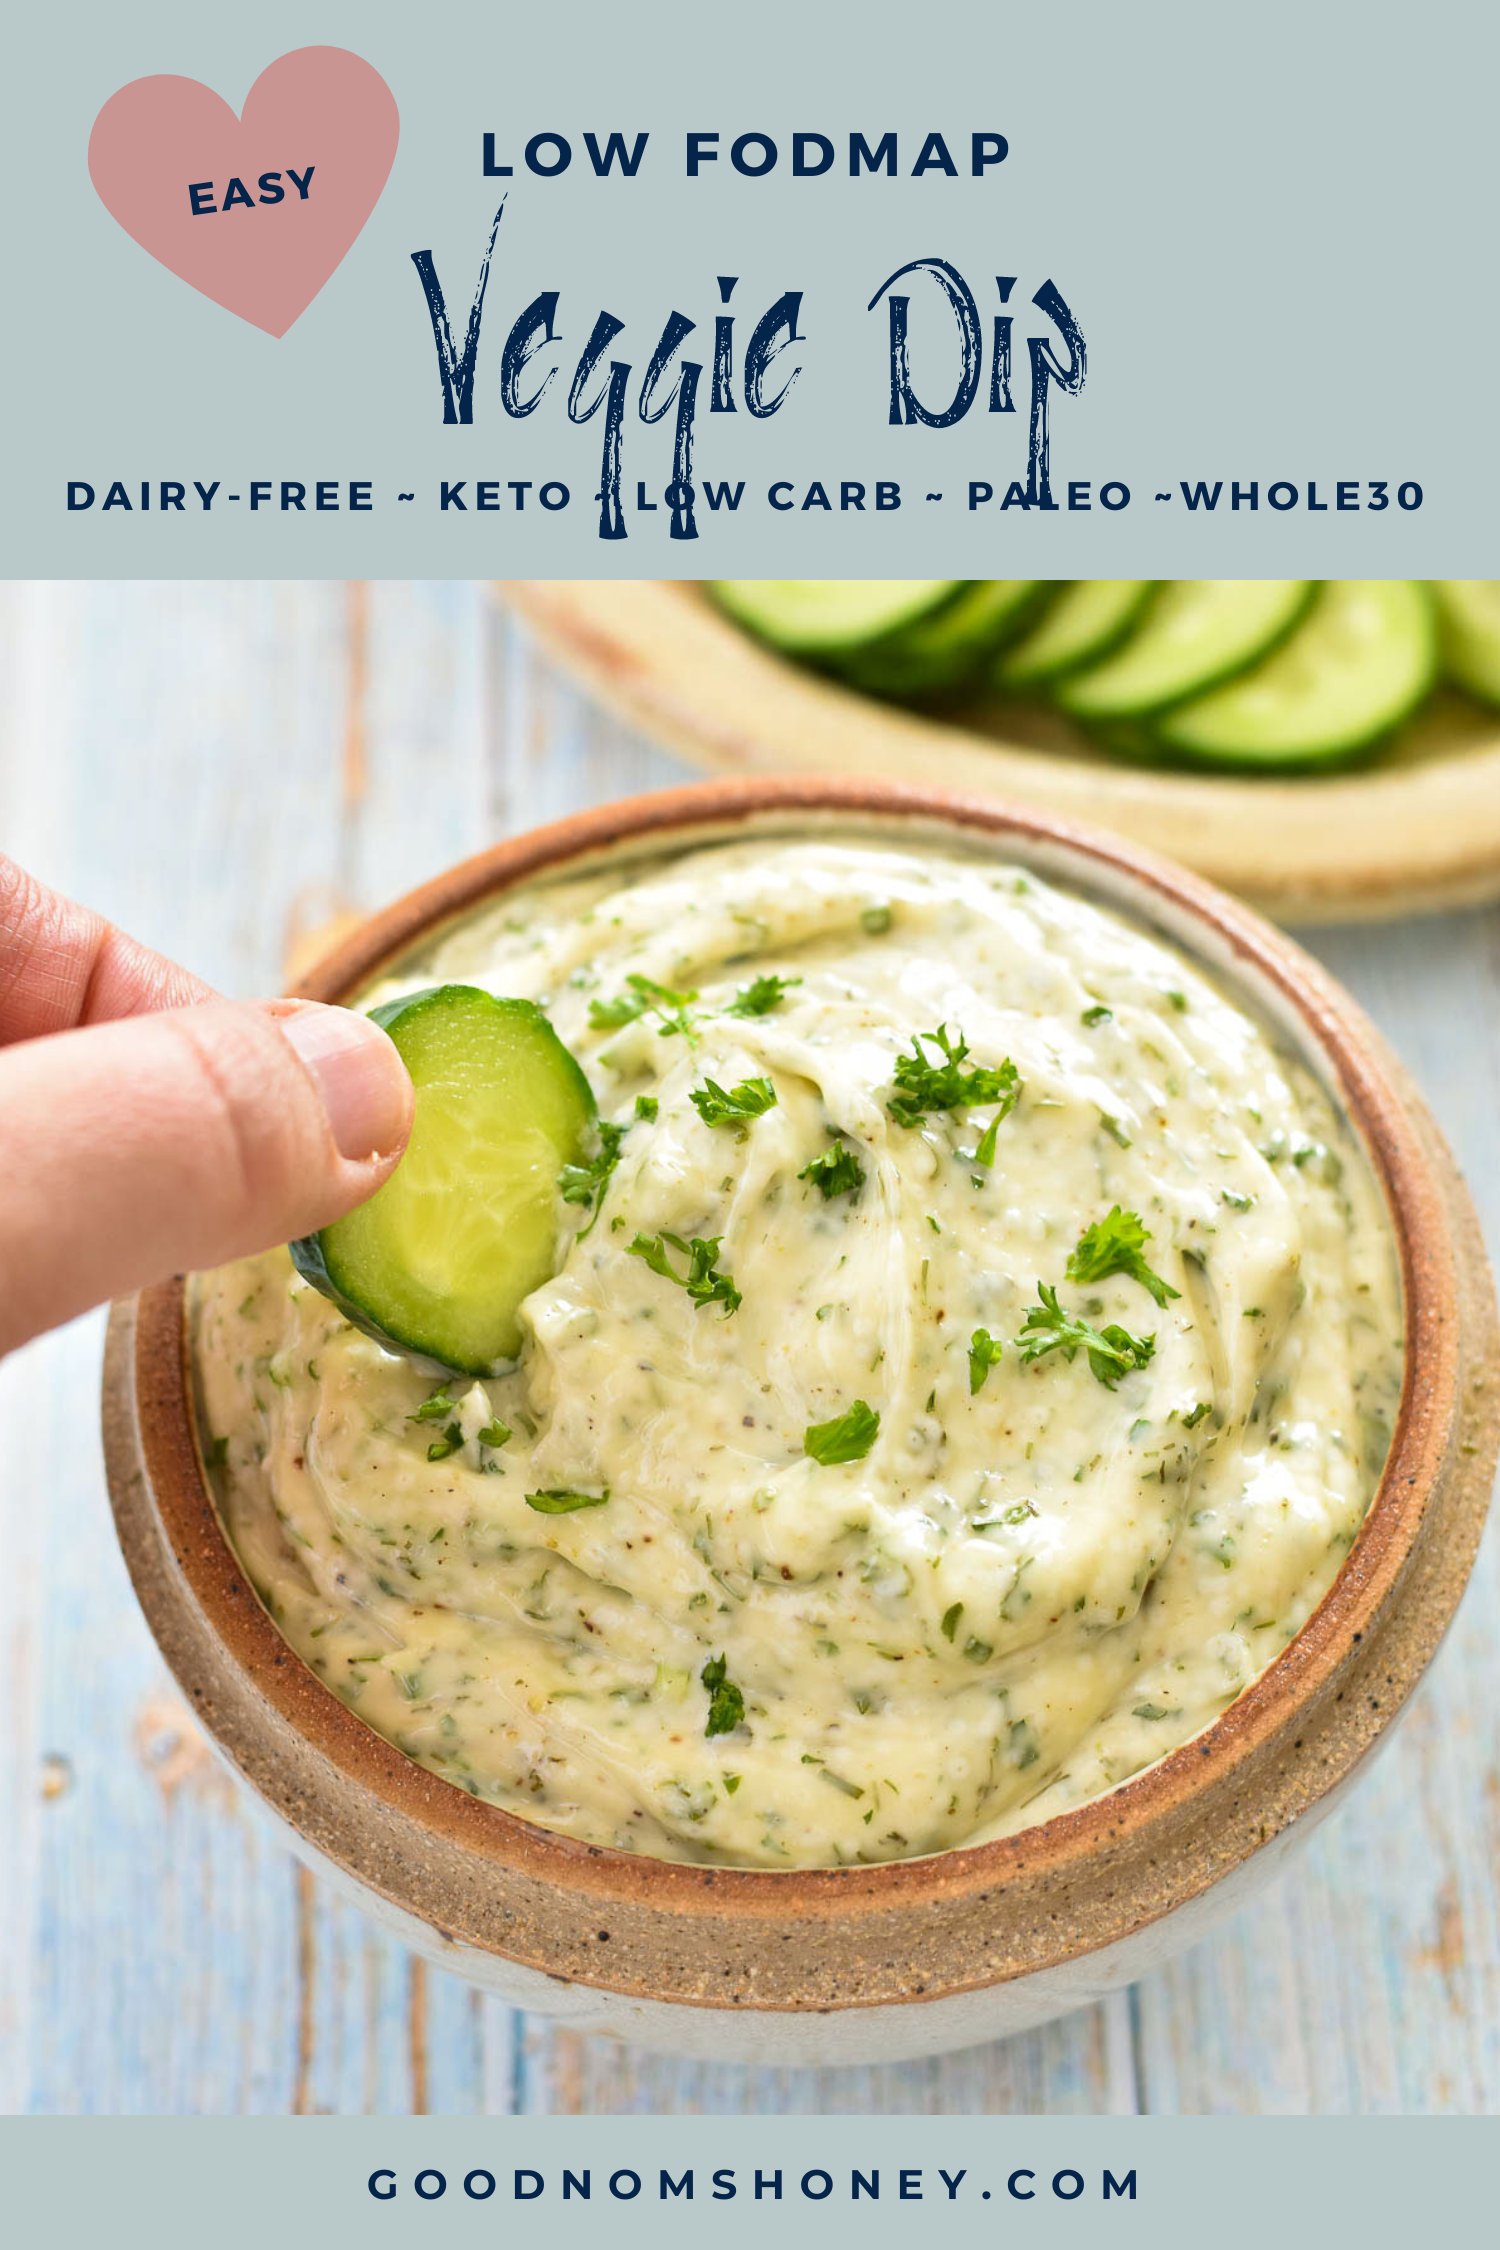 pinterest image with easy low fodmap veggie dip dairy-free keto low carb paleo whole30 at the top and goodnomshoney.com at the bottom